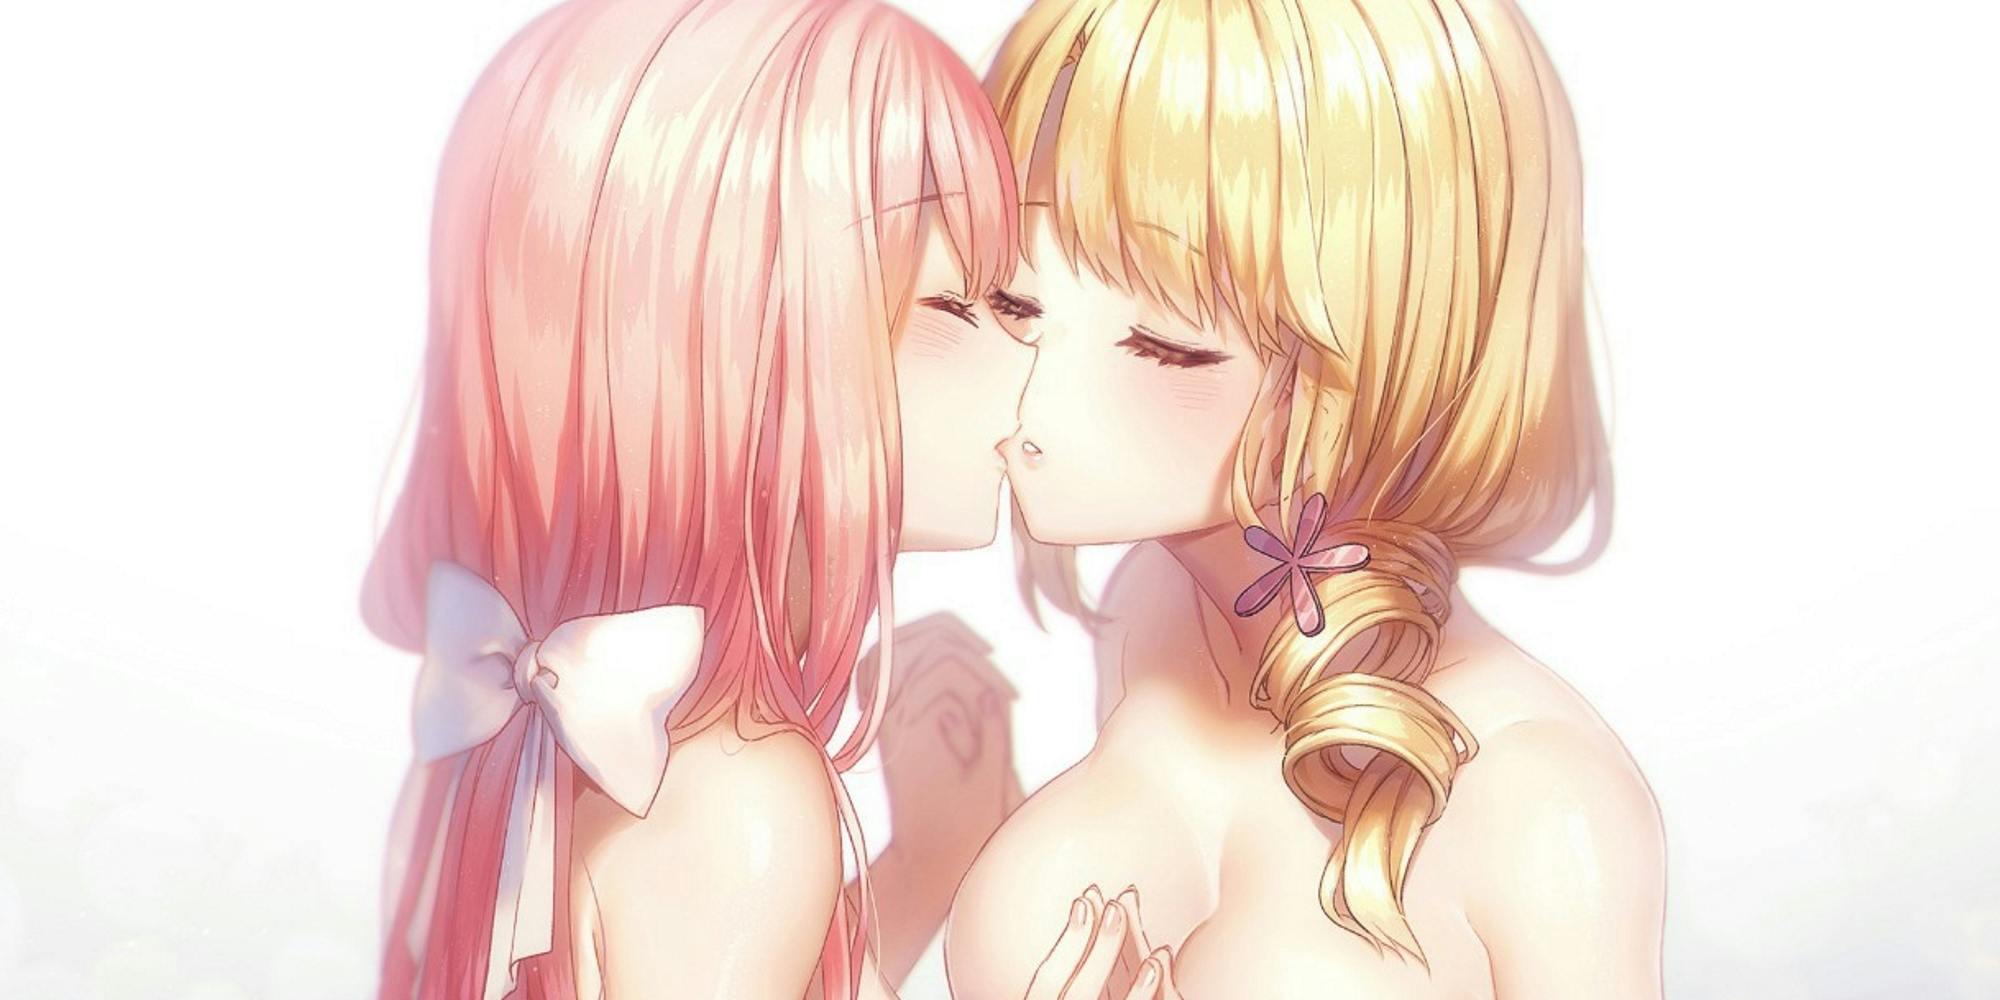 Eroge, visual novels, and hentai: Your guide to adult visual novels